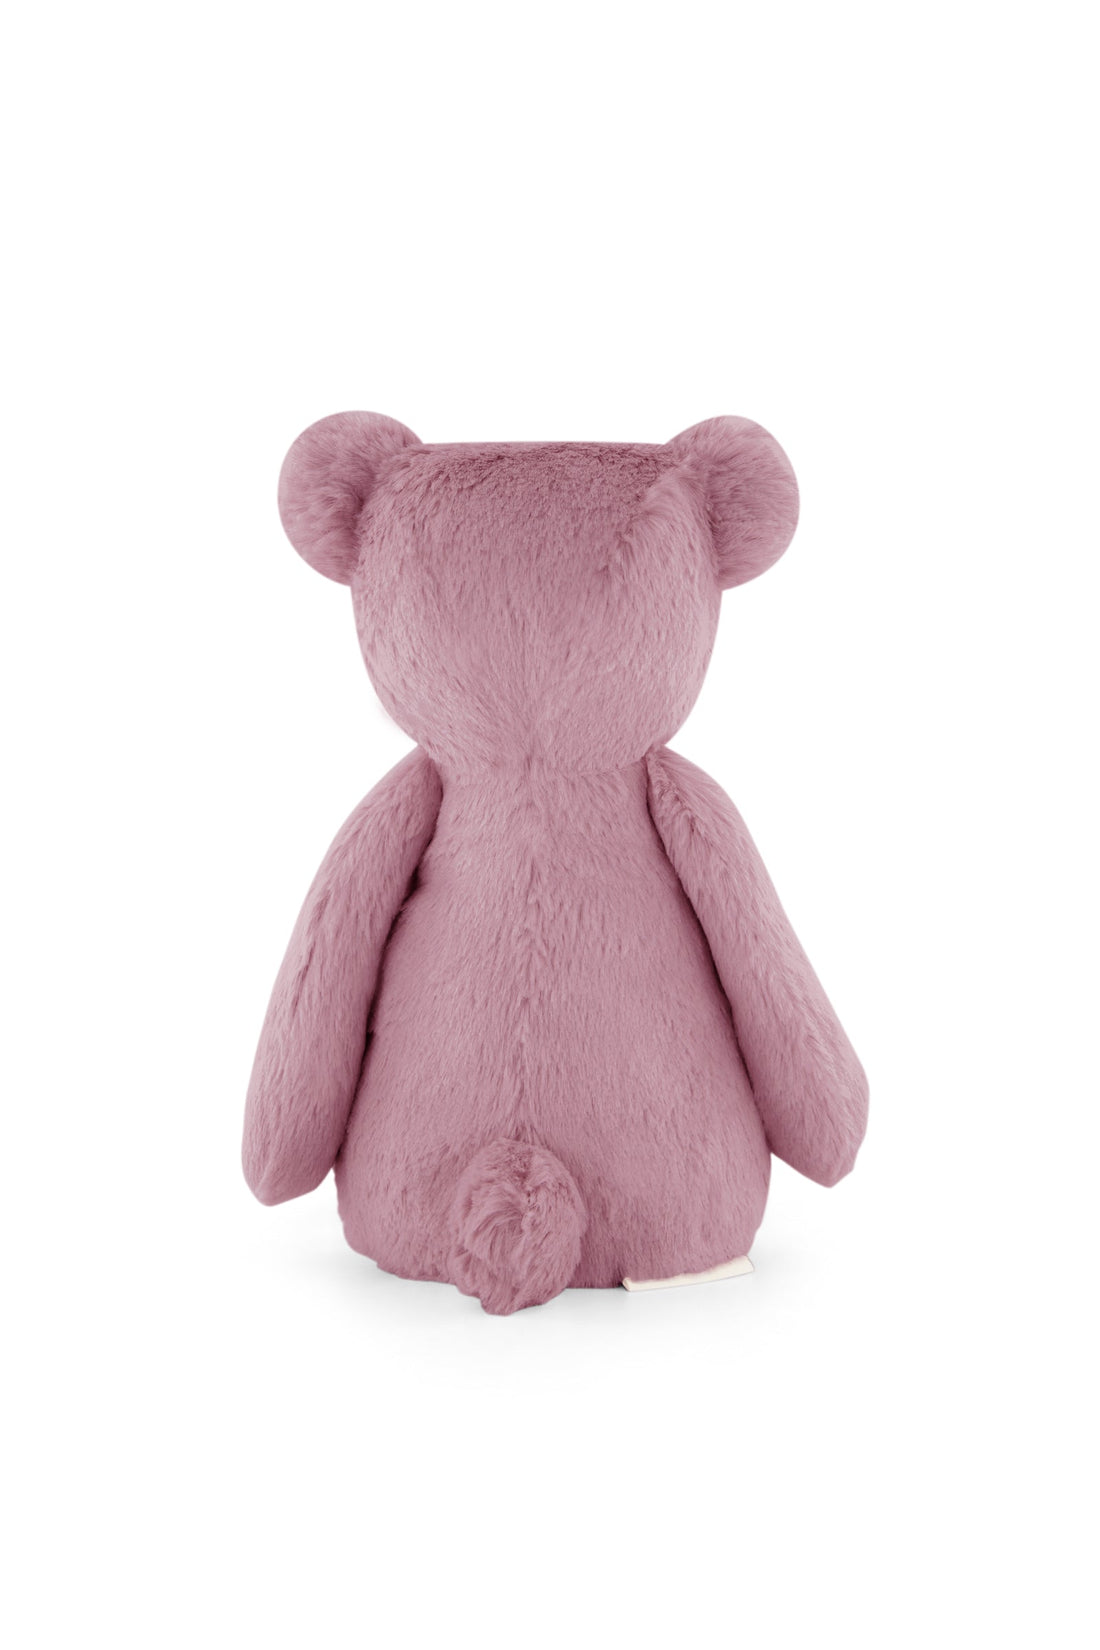 Snuggle Bunnies - George the Bear - Lilium Childrens Toy from Jamie Kay USA